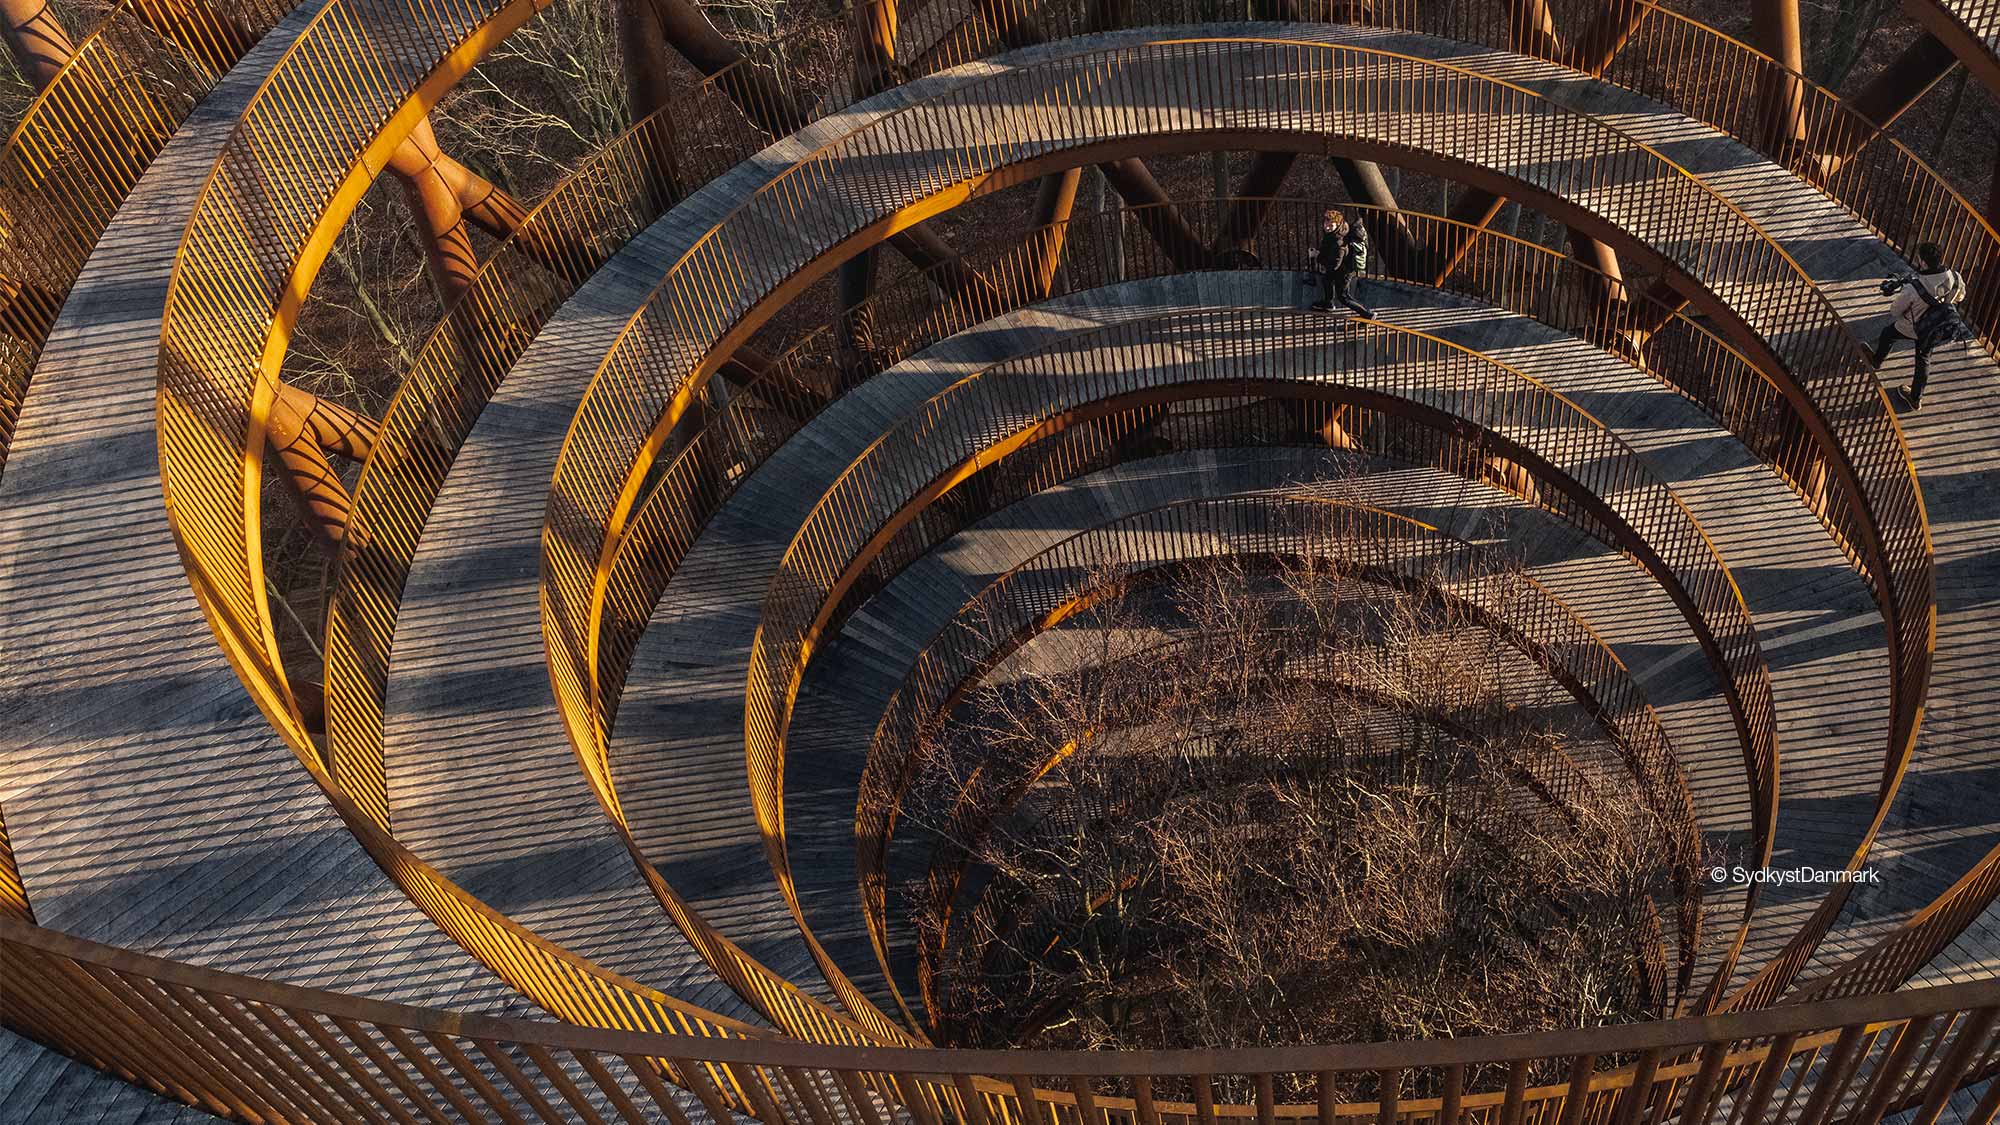 Camp Adventure observation tower's spiraling ramp made out of steel and wood. © SydkystDanmark 